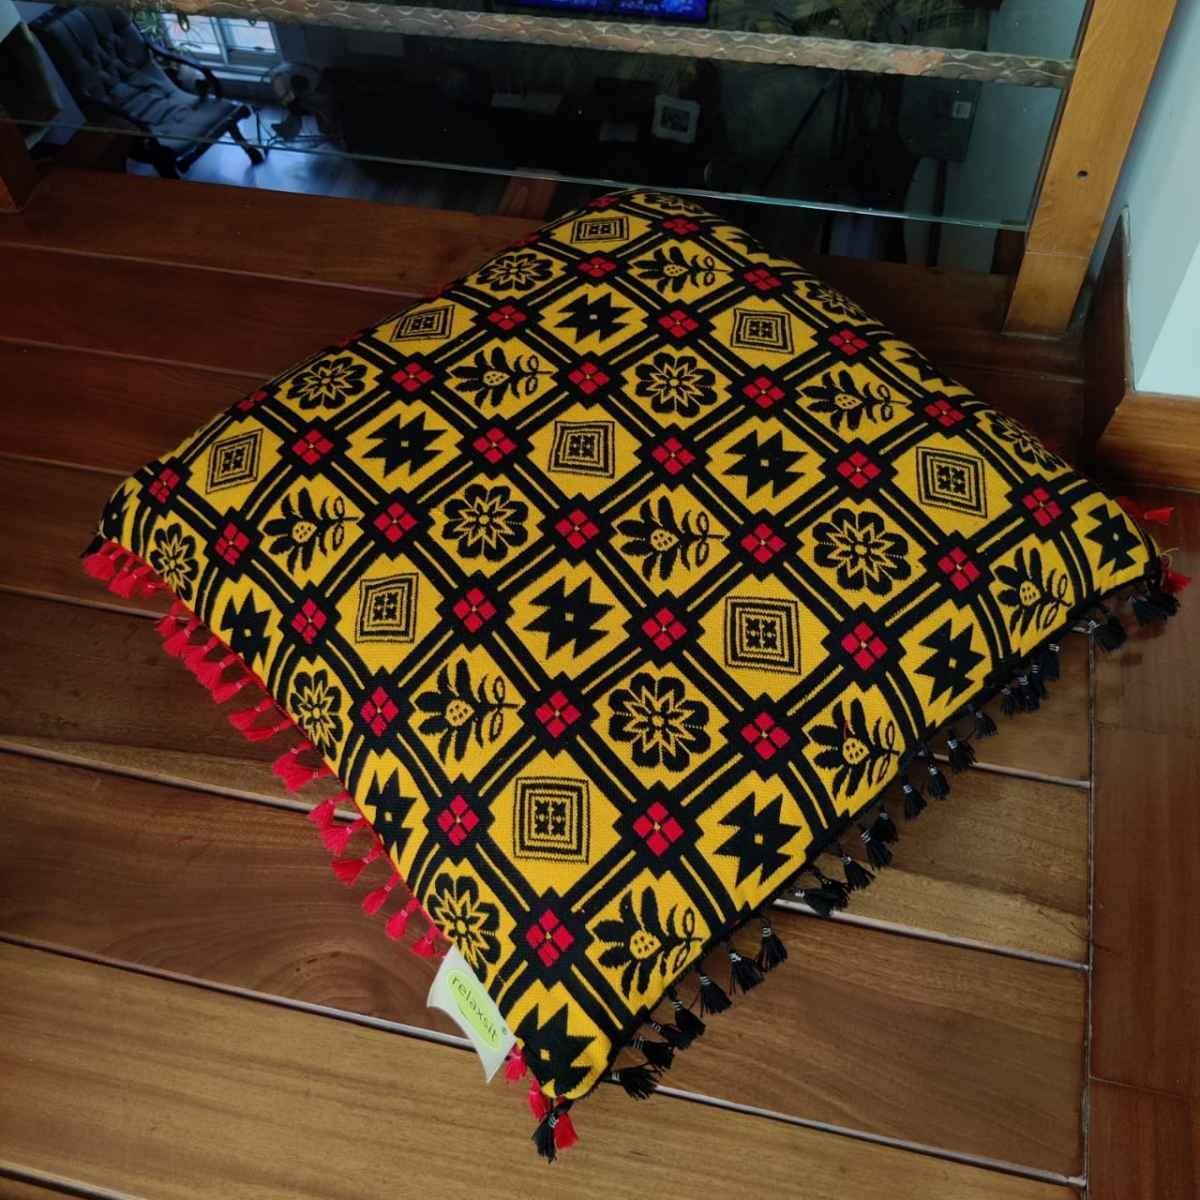 Traditional Floor Filled Cushion Acrylic & polyester Inclusive of filing case size 26 x 26" Relaxsit